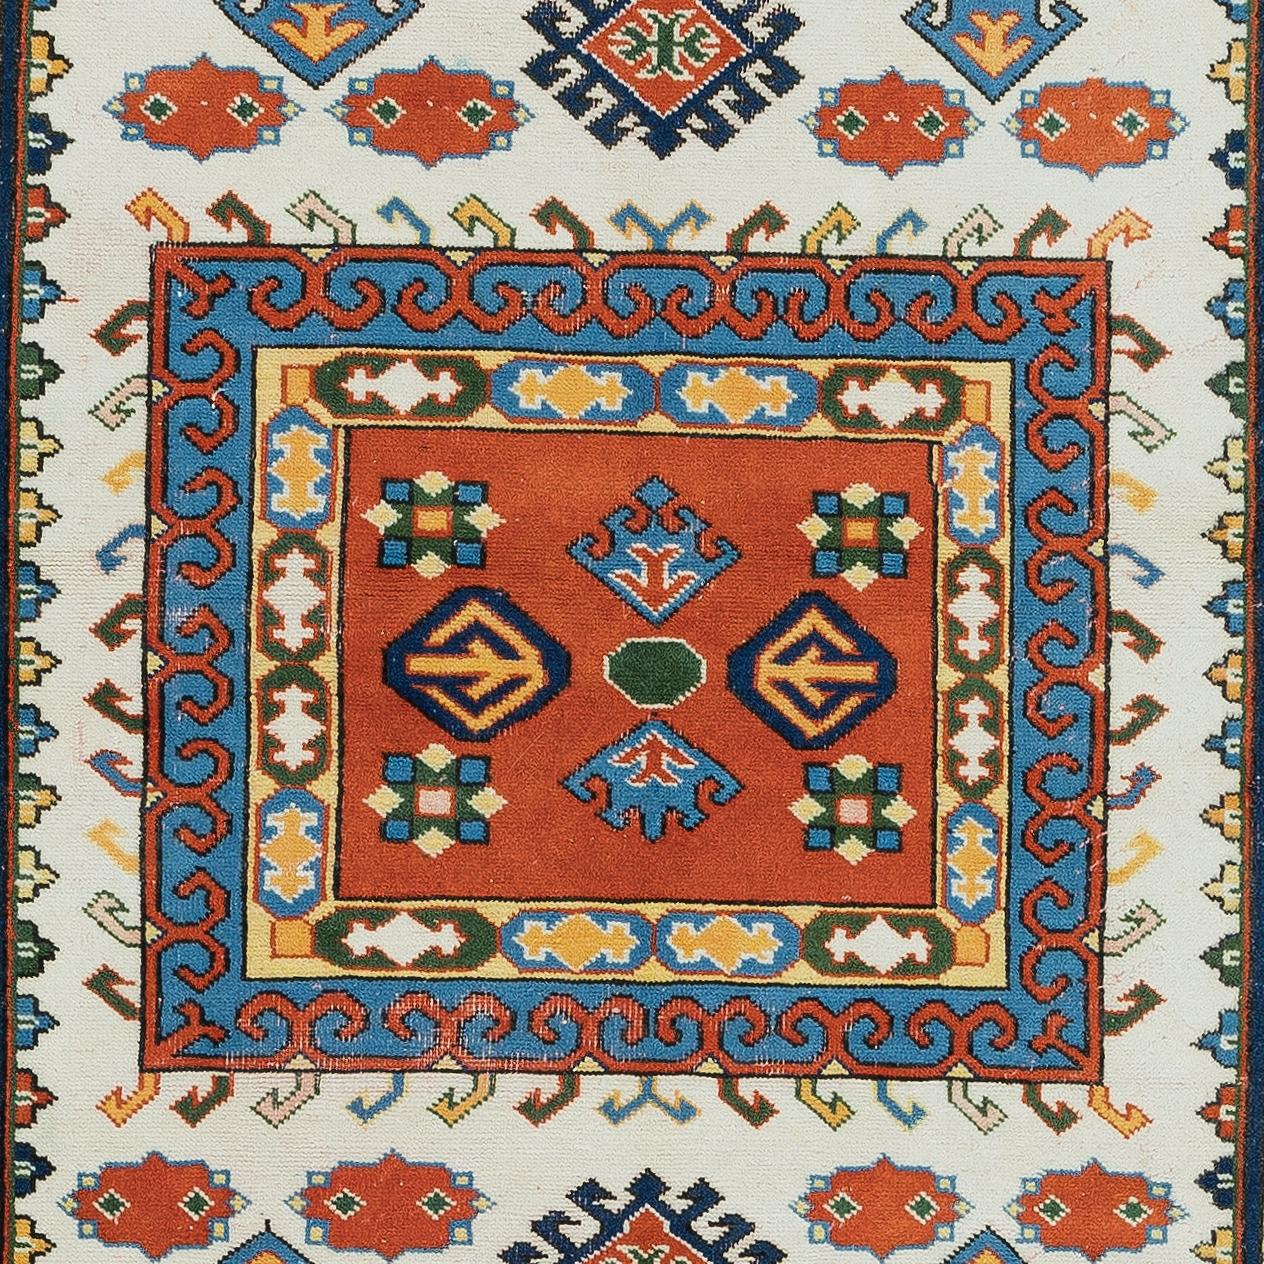 Hand-Knotted 4x5.6 Ft Colorful Accent Rug, Vintage Turkish Carpet, Handmade Floor Covering For Sale